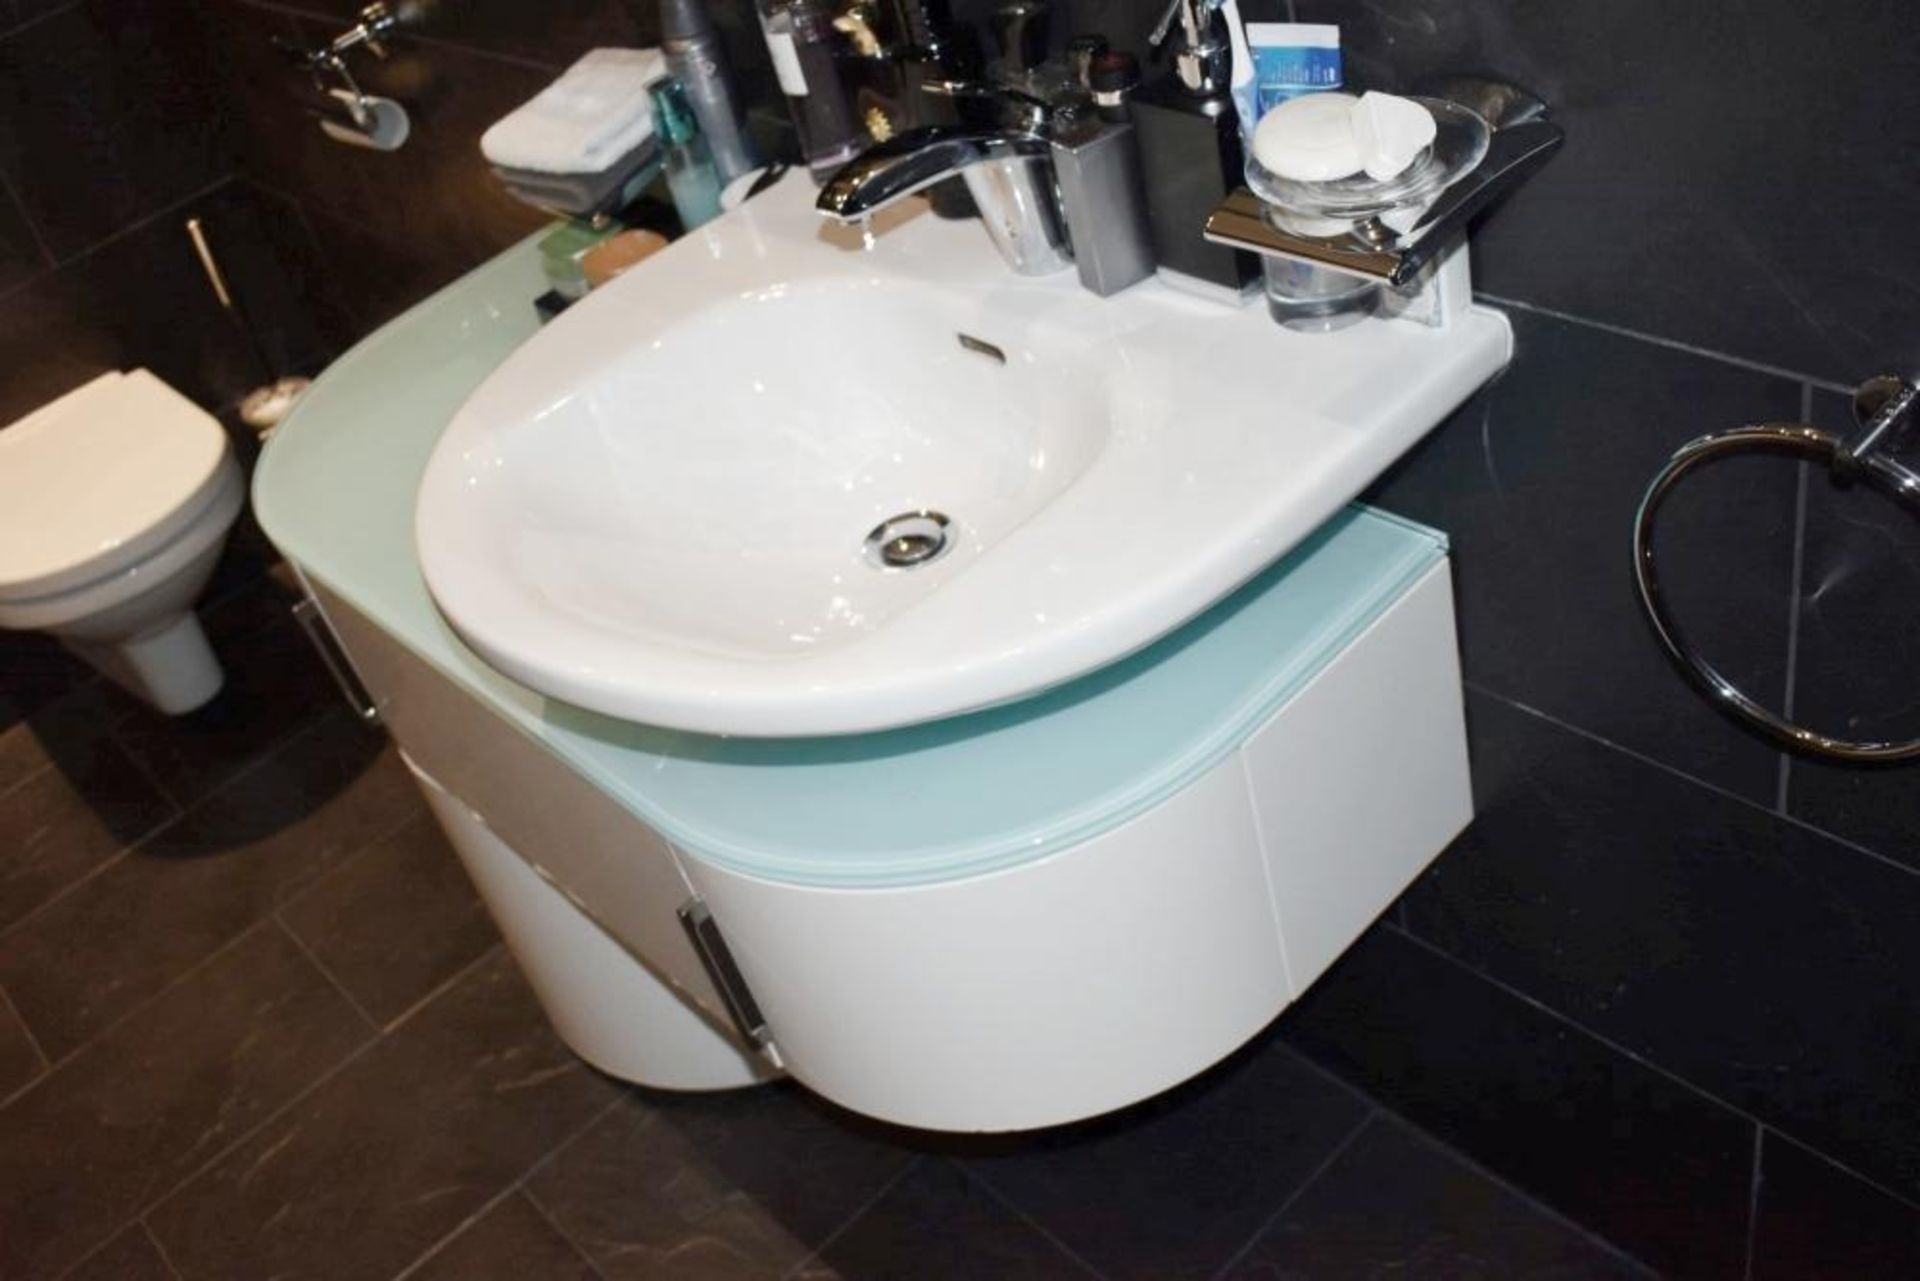 1 x Contents Of Luxury Bathroom - Includes TUECO Bath With Jets - Original Purchase Price £6,590 - Image 11 of 23